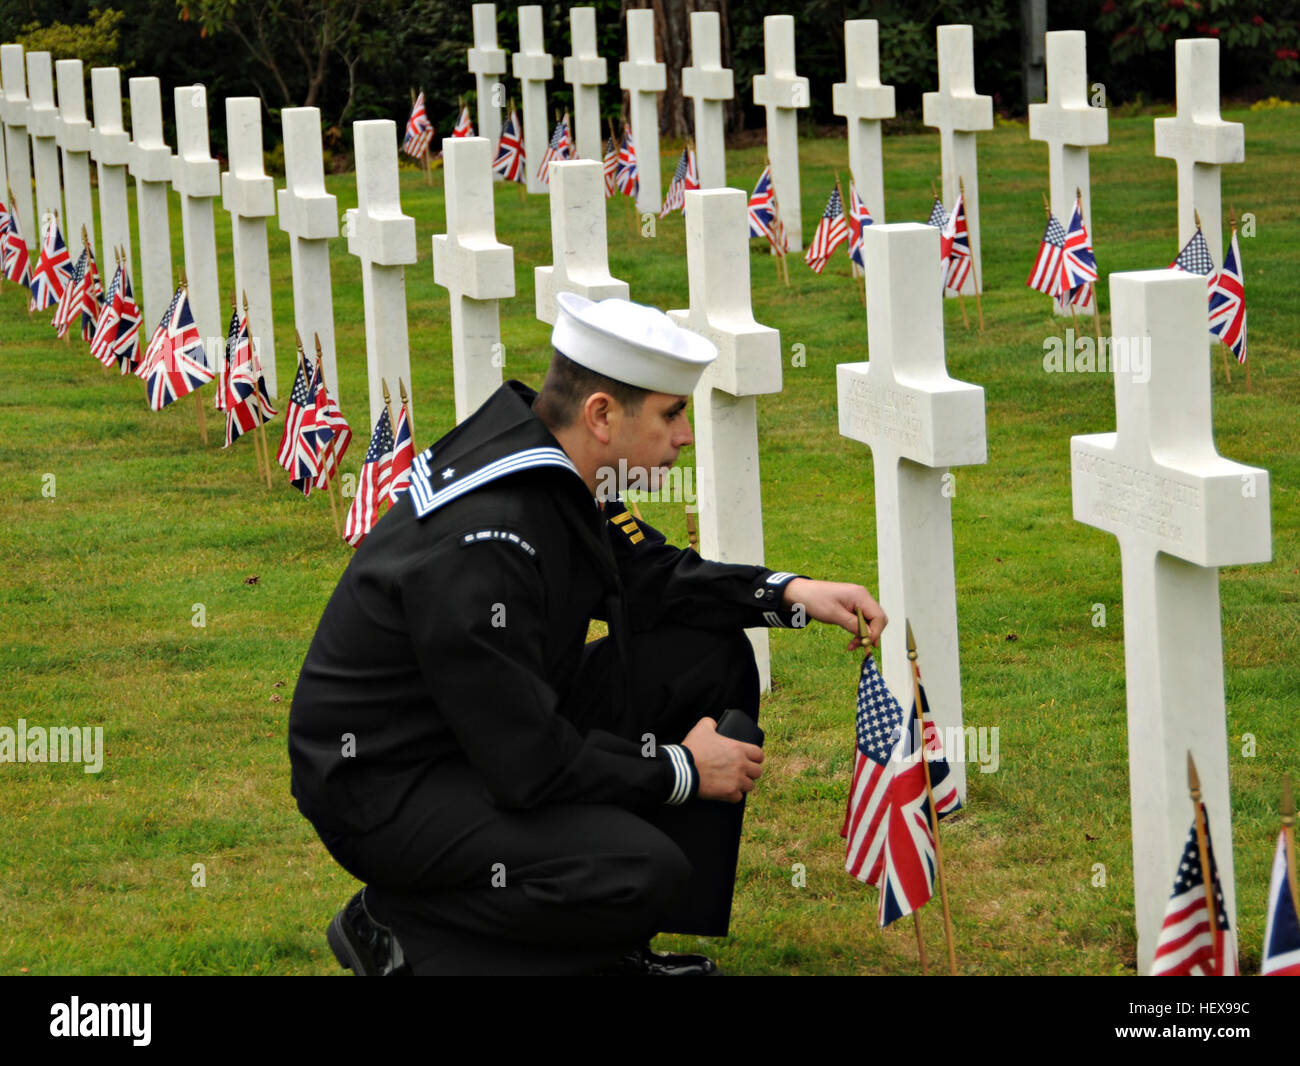 Petty Officer 1st Class Samuel Hernandez-Moreno, ship's serviceman, assigned to the aircraft carrier USS George H.W. Bush, pays his respects to a fallen service member buried at the Brookwood American Cemetery and Memorial on Memorial Day. George H.W. Bush is anchored off the coast of Portsmouth, England, for the ship's first overseas port visit of its first combat deployment. Flickr - DVIDSHUB - Memorial Day service at Brookwood American Cemetery and Memorial (Image 1 of 2) Stock Photo